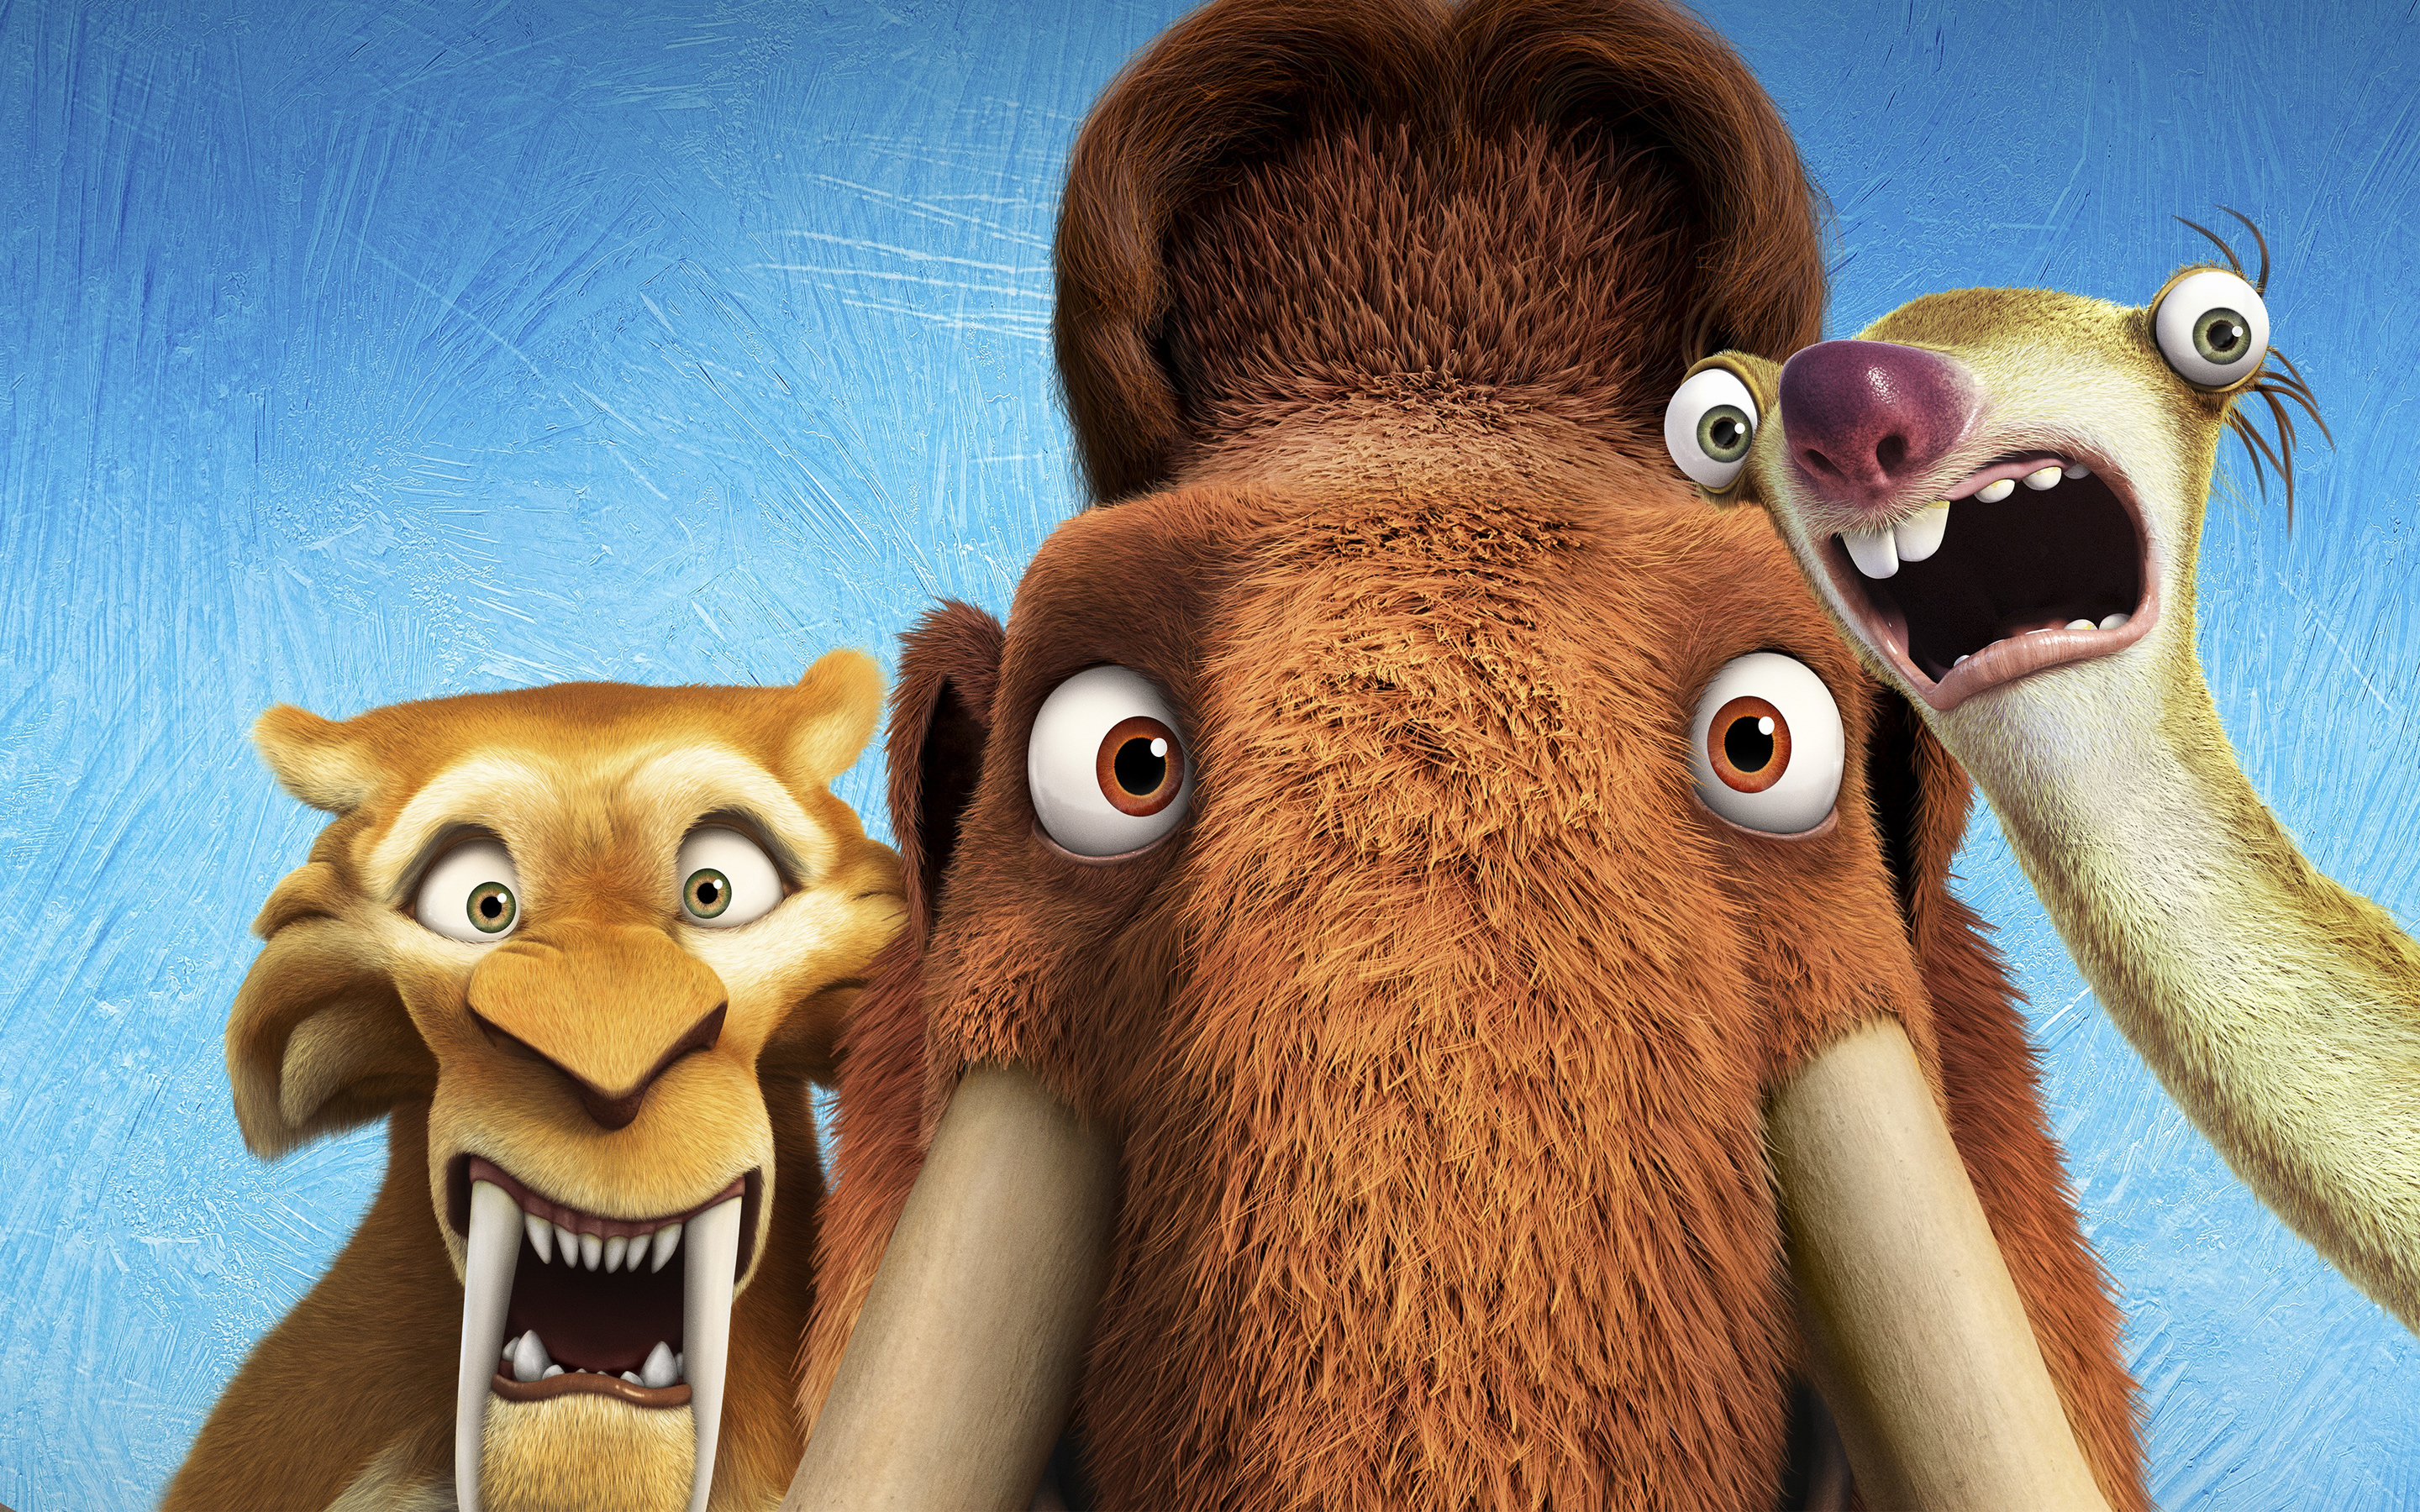 Ice Age: Collision Course Wallpapers